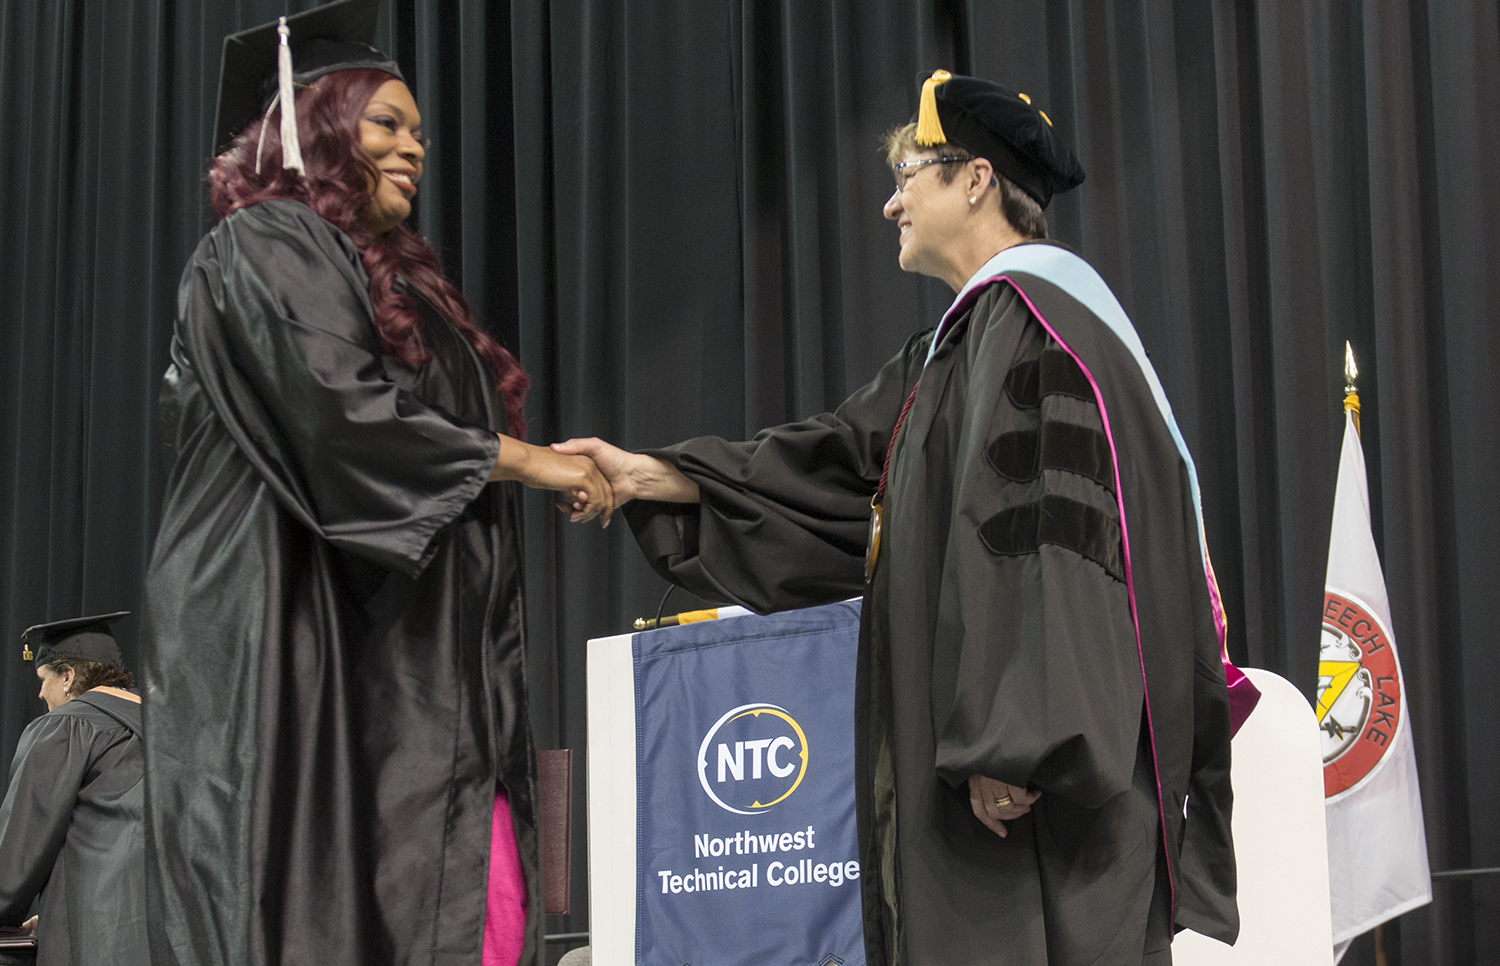 Graduates received their degrees, diplomas and certificates at NTC's commencement ceremony.